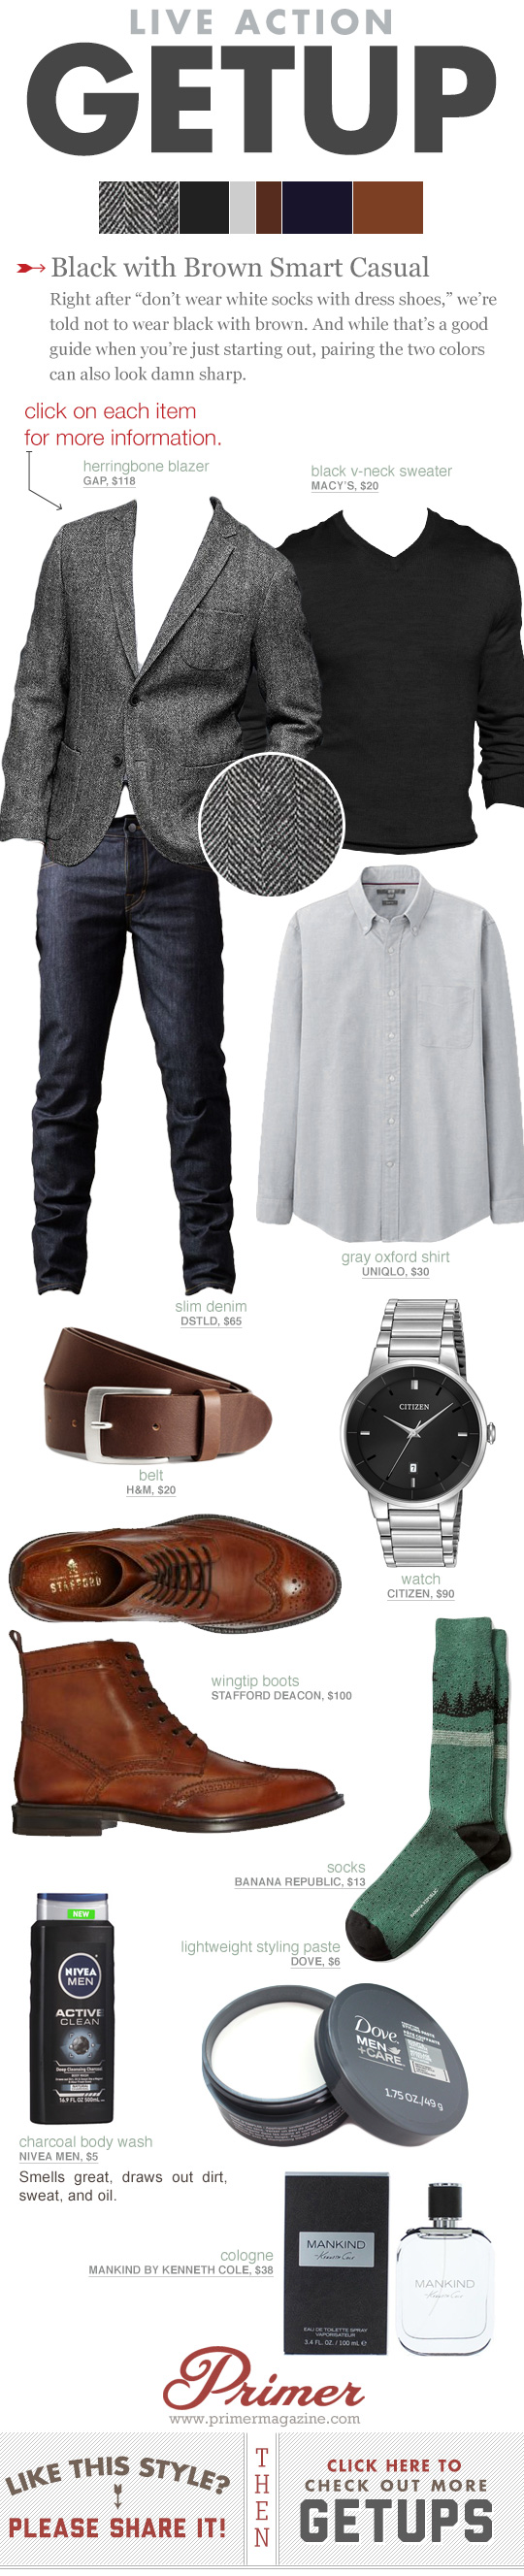 Outfit inspiration featuring gray sportcoat, sweater, and jeans